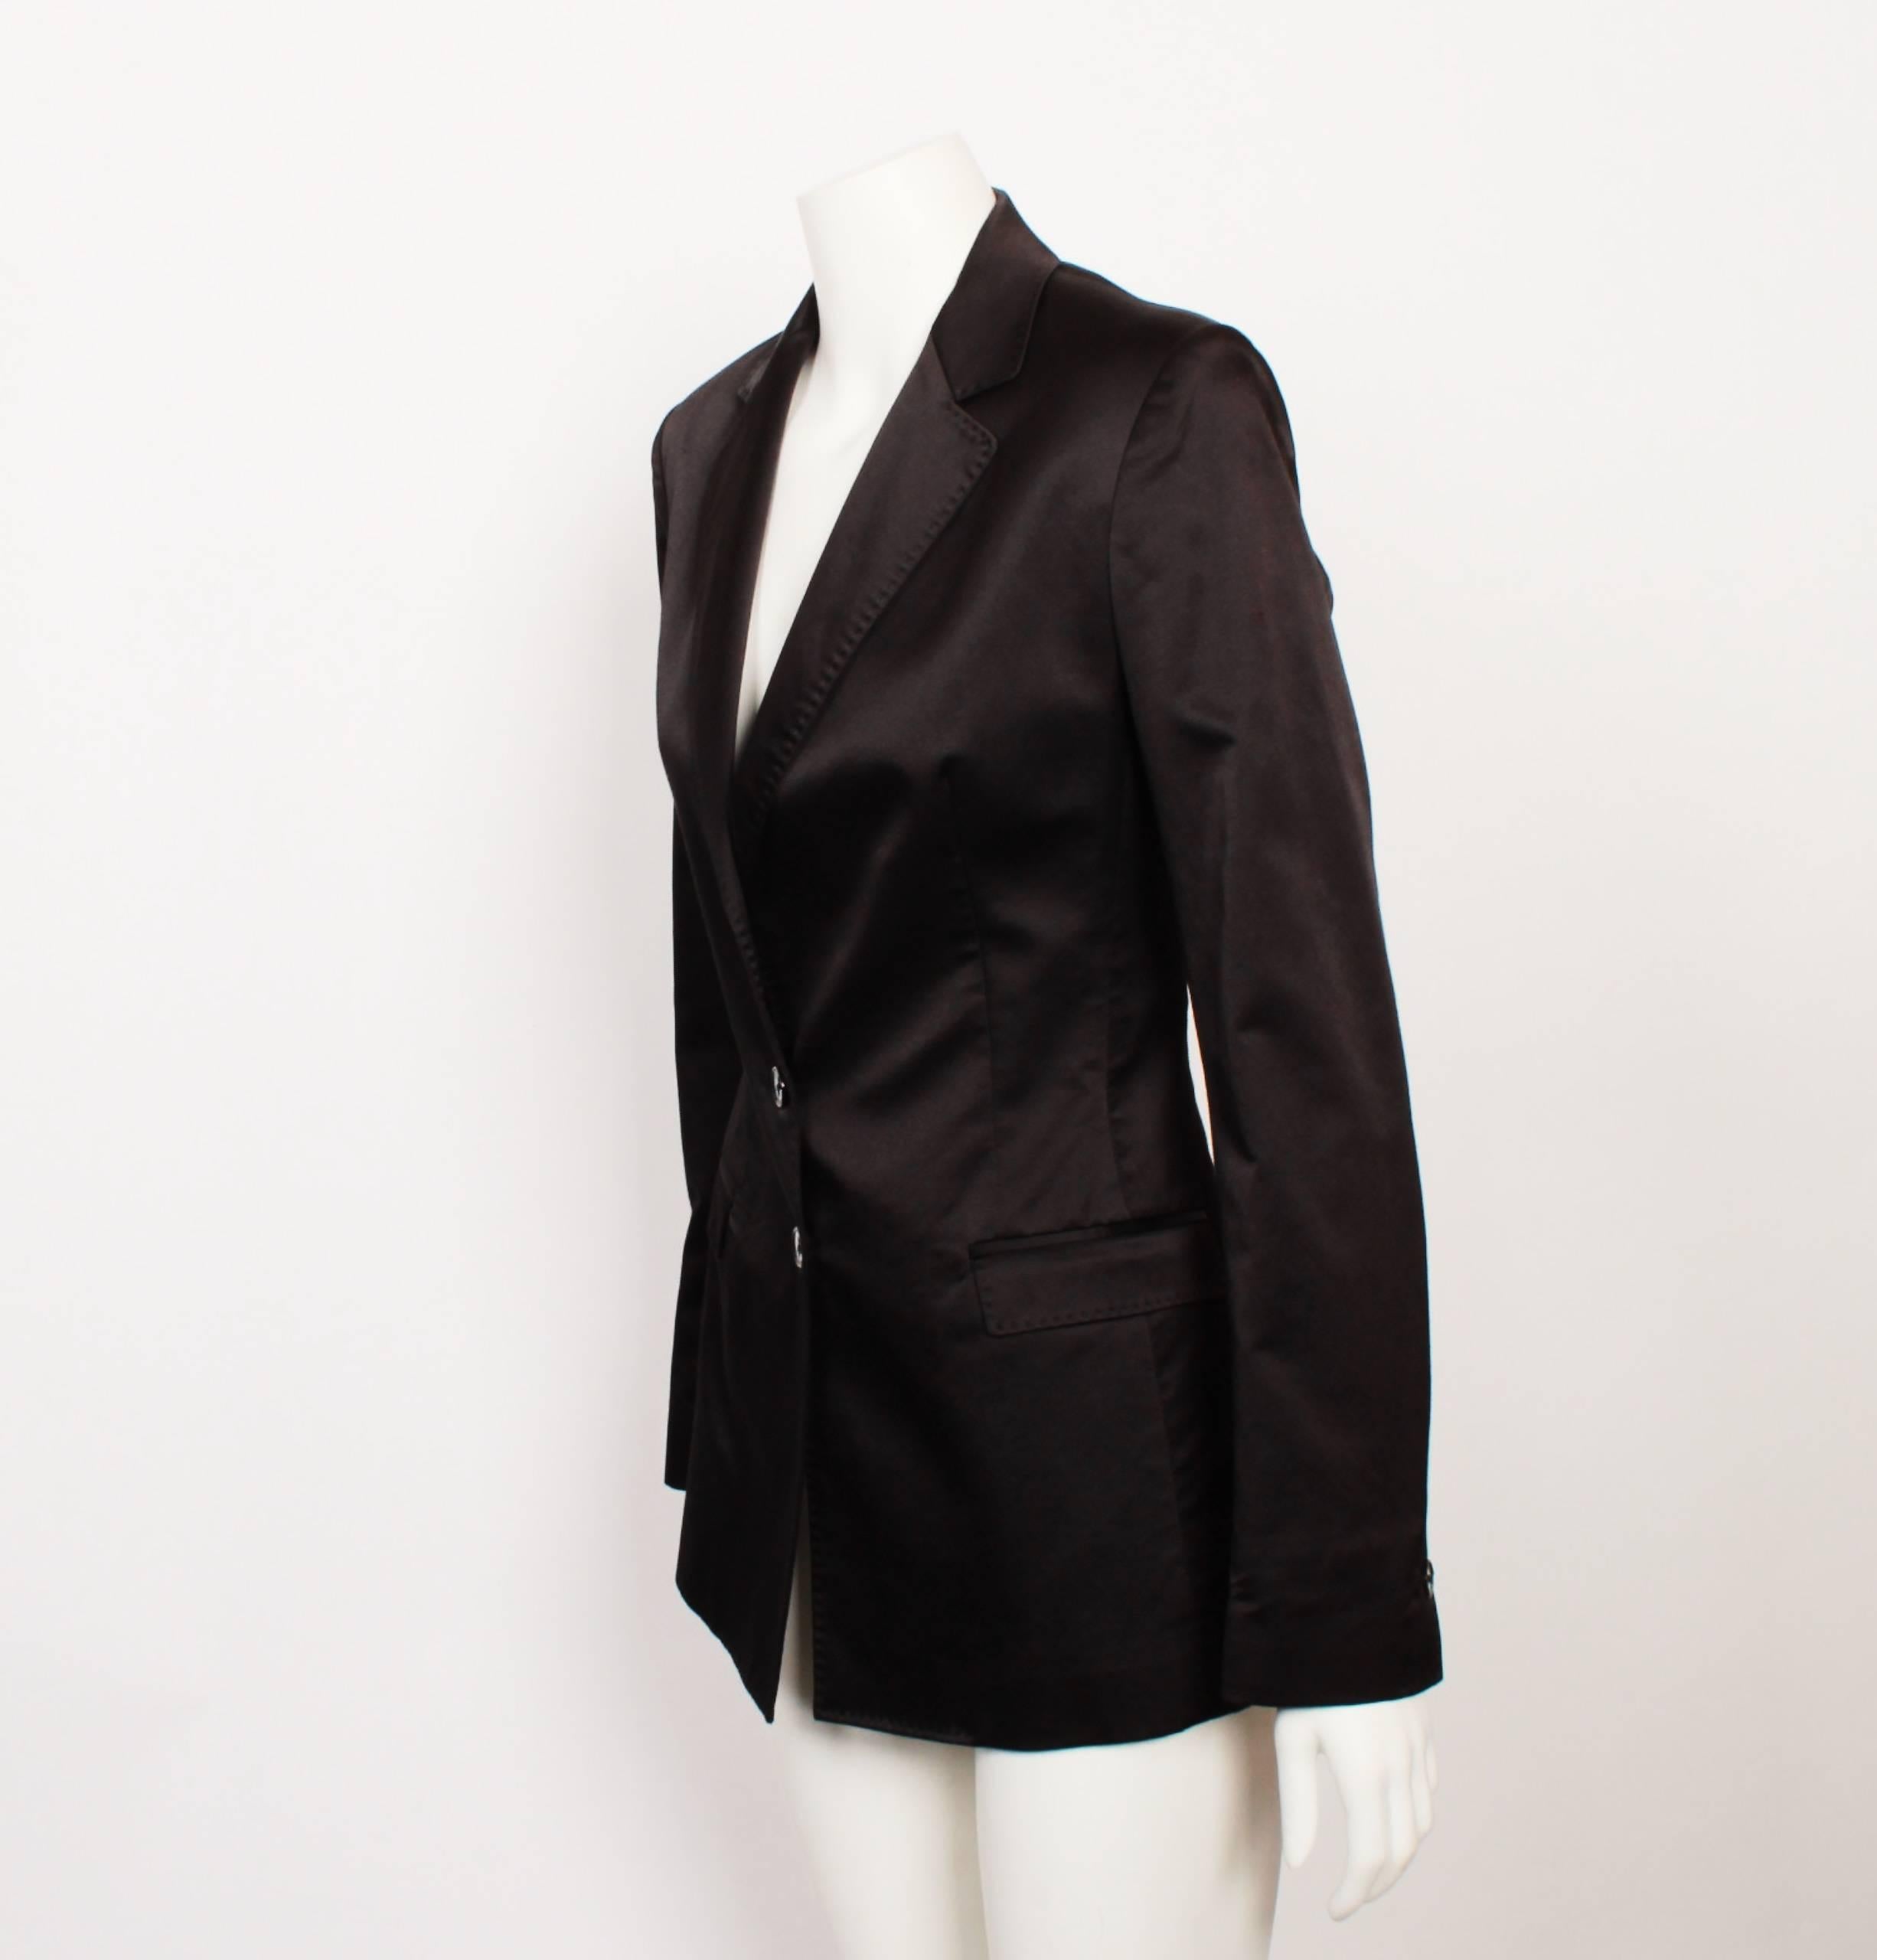 FINAL SALE

Ready to wear Black Tailored Versus Blazer.
Versus is the diffusion label of Italian luxury fashion house Versace.
Originating in 1989. 

Size 42

